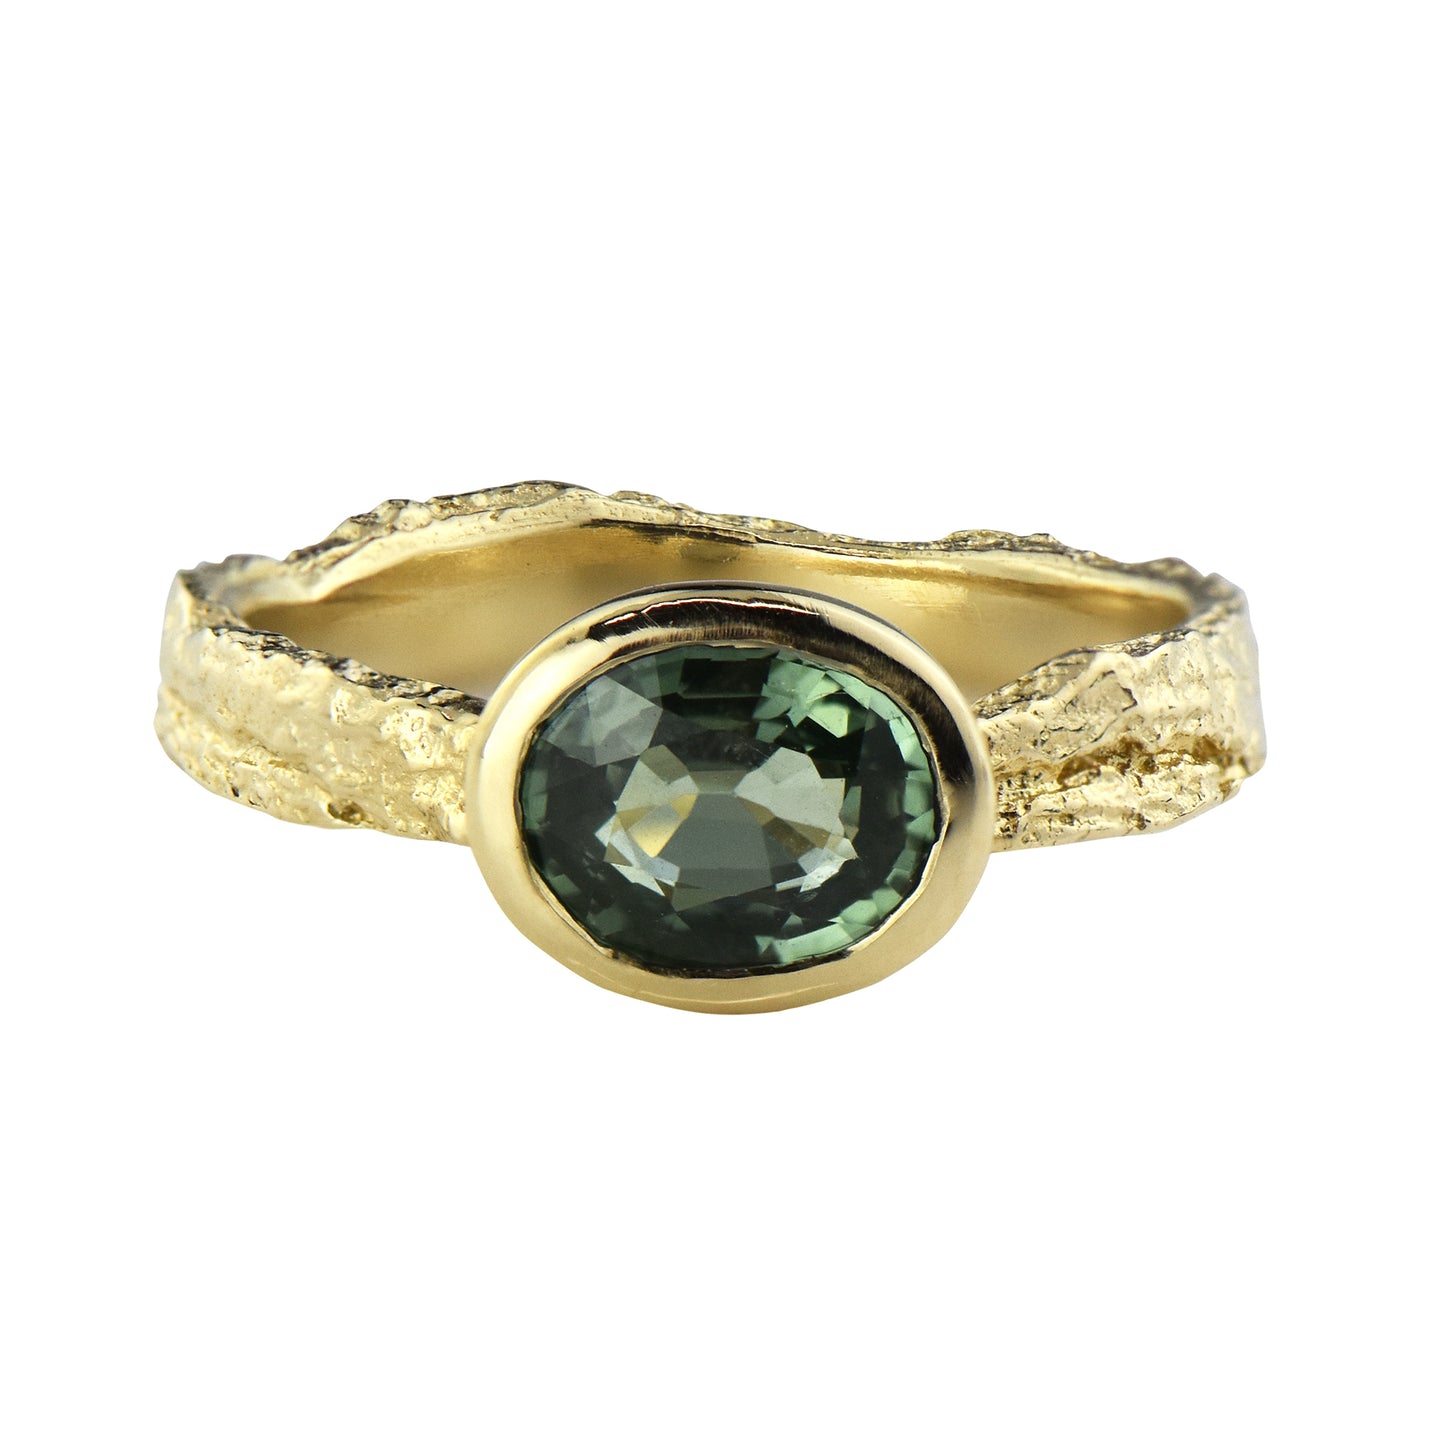 14ct Gold London Plane Ring With Green Sapphire